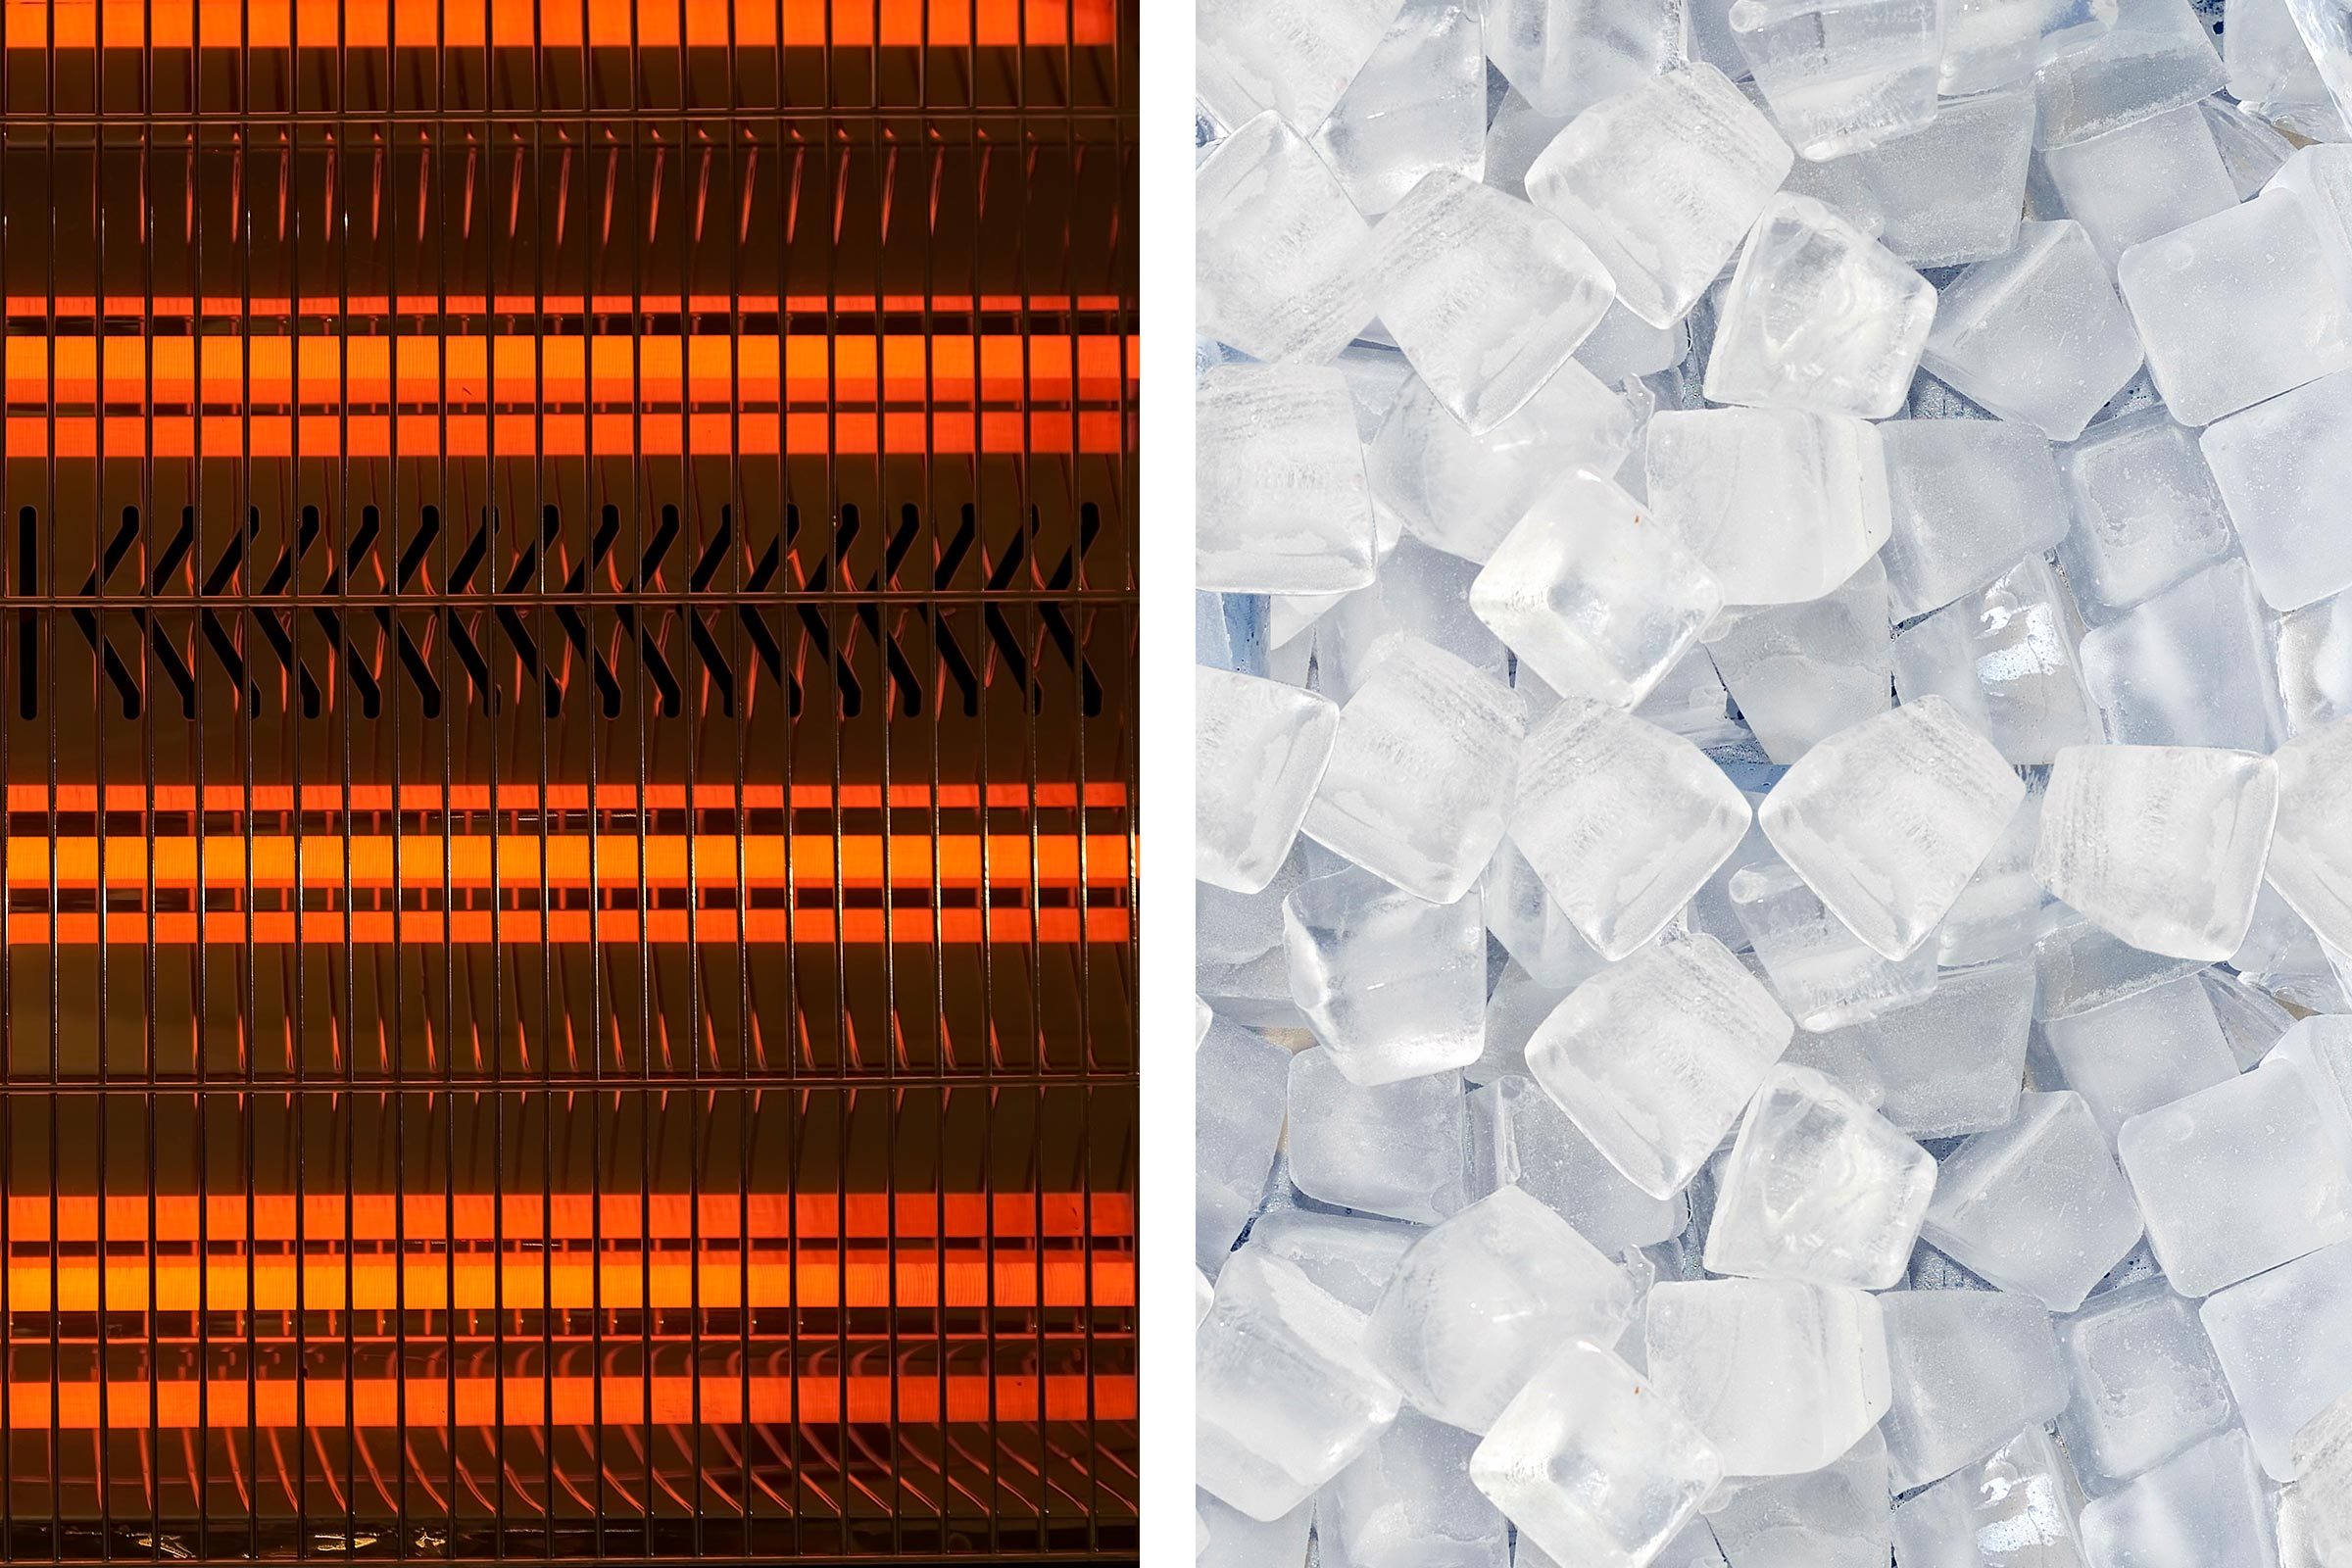 Ice or Heat: What's Best for Your Pain?